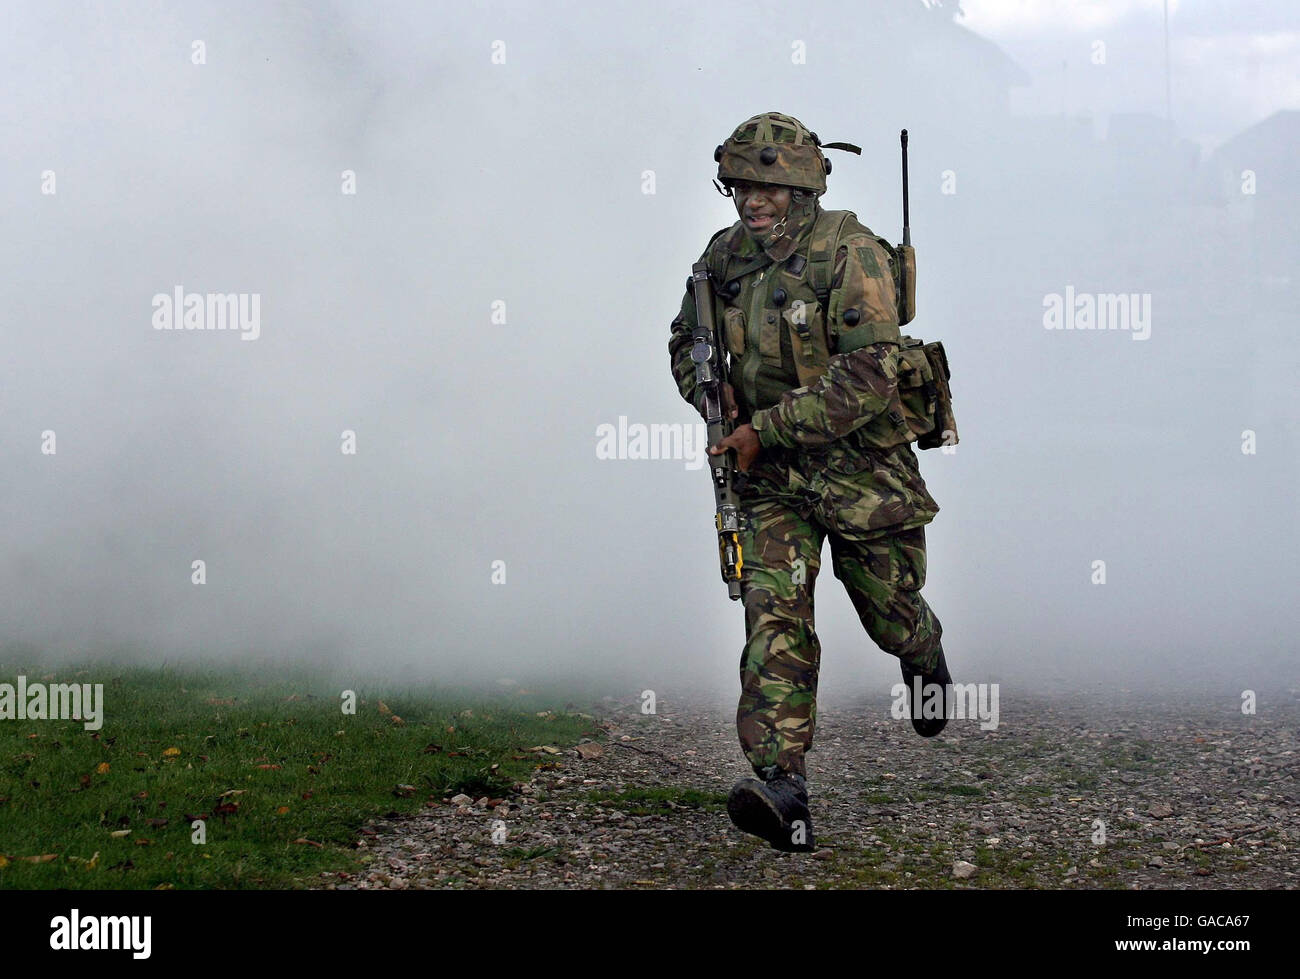 A soldier takes part in a training exercise at Copehill Down Village on Salisbury Plain, Wiltshire. The Army were today demonstrating the latest simulation equipment to train troops to deal with roadside bombs. Stock Photo